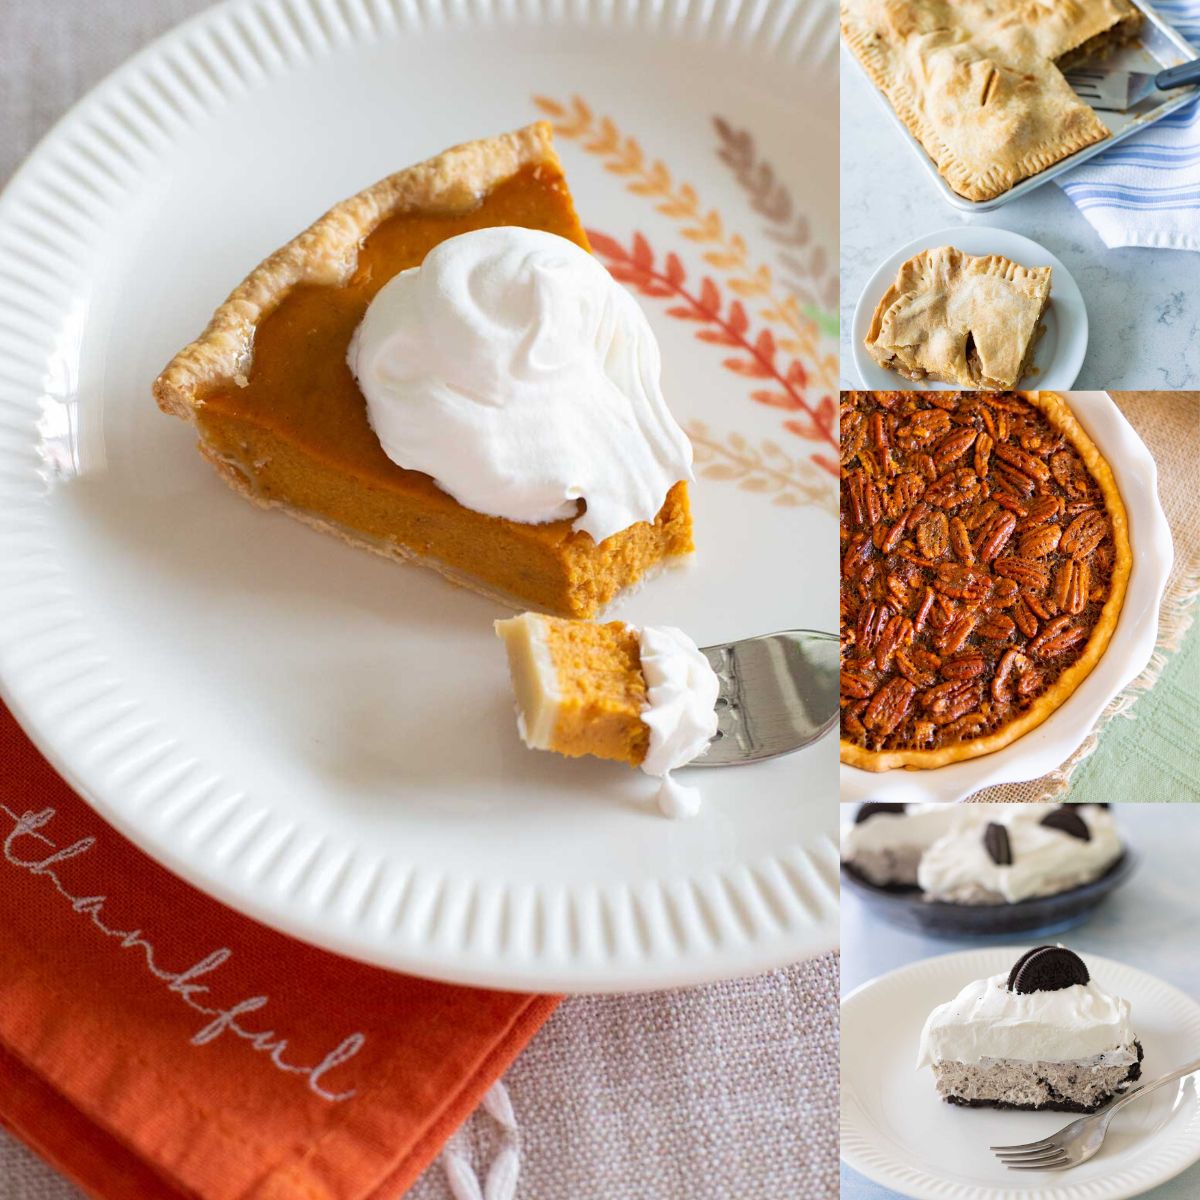 The photo collage shows slices of pumpkin pie, apple pie, a whole pecan pie, and a slice of Oreo cream pie.